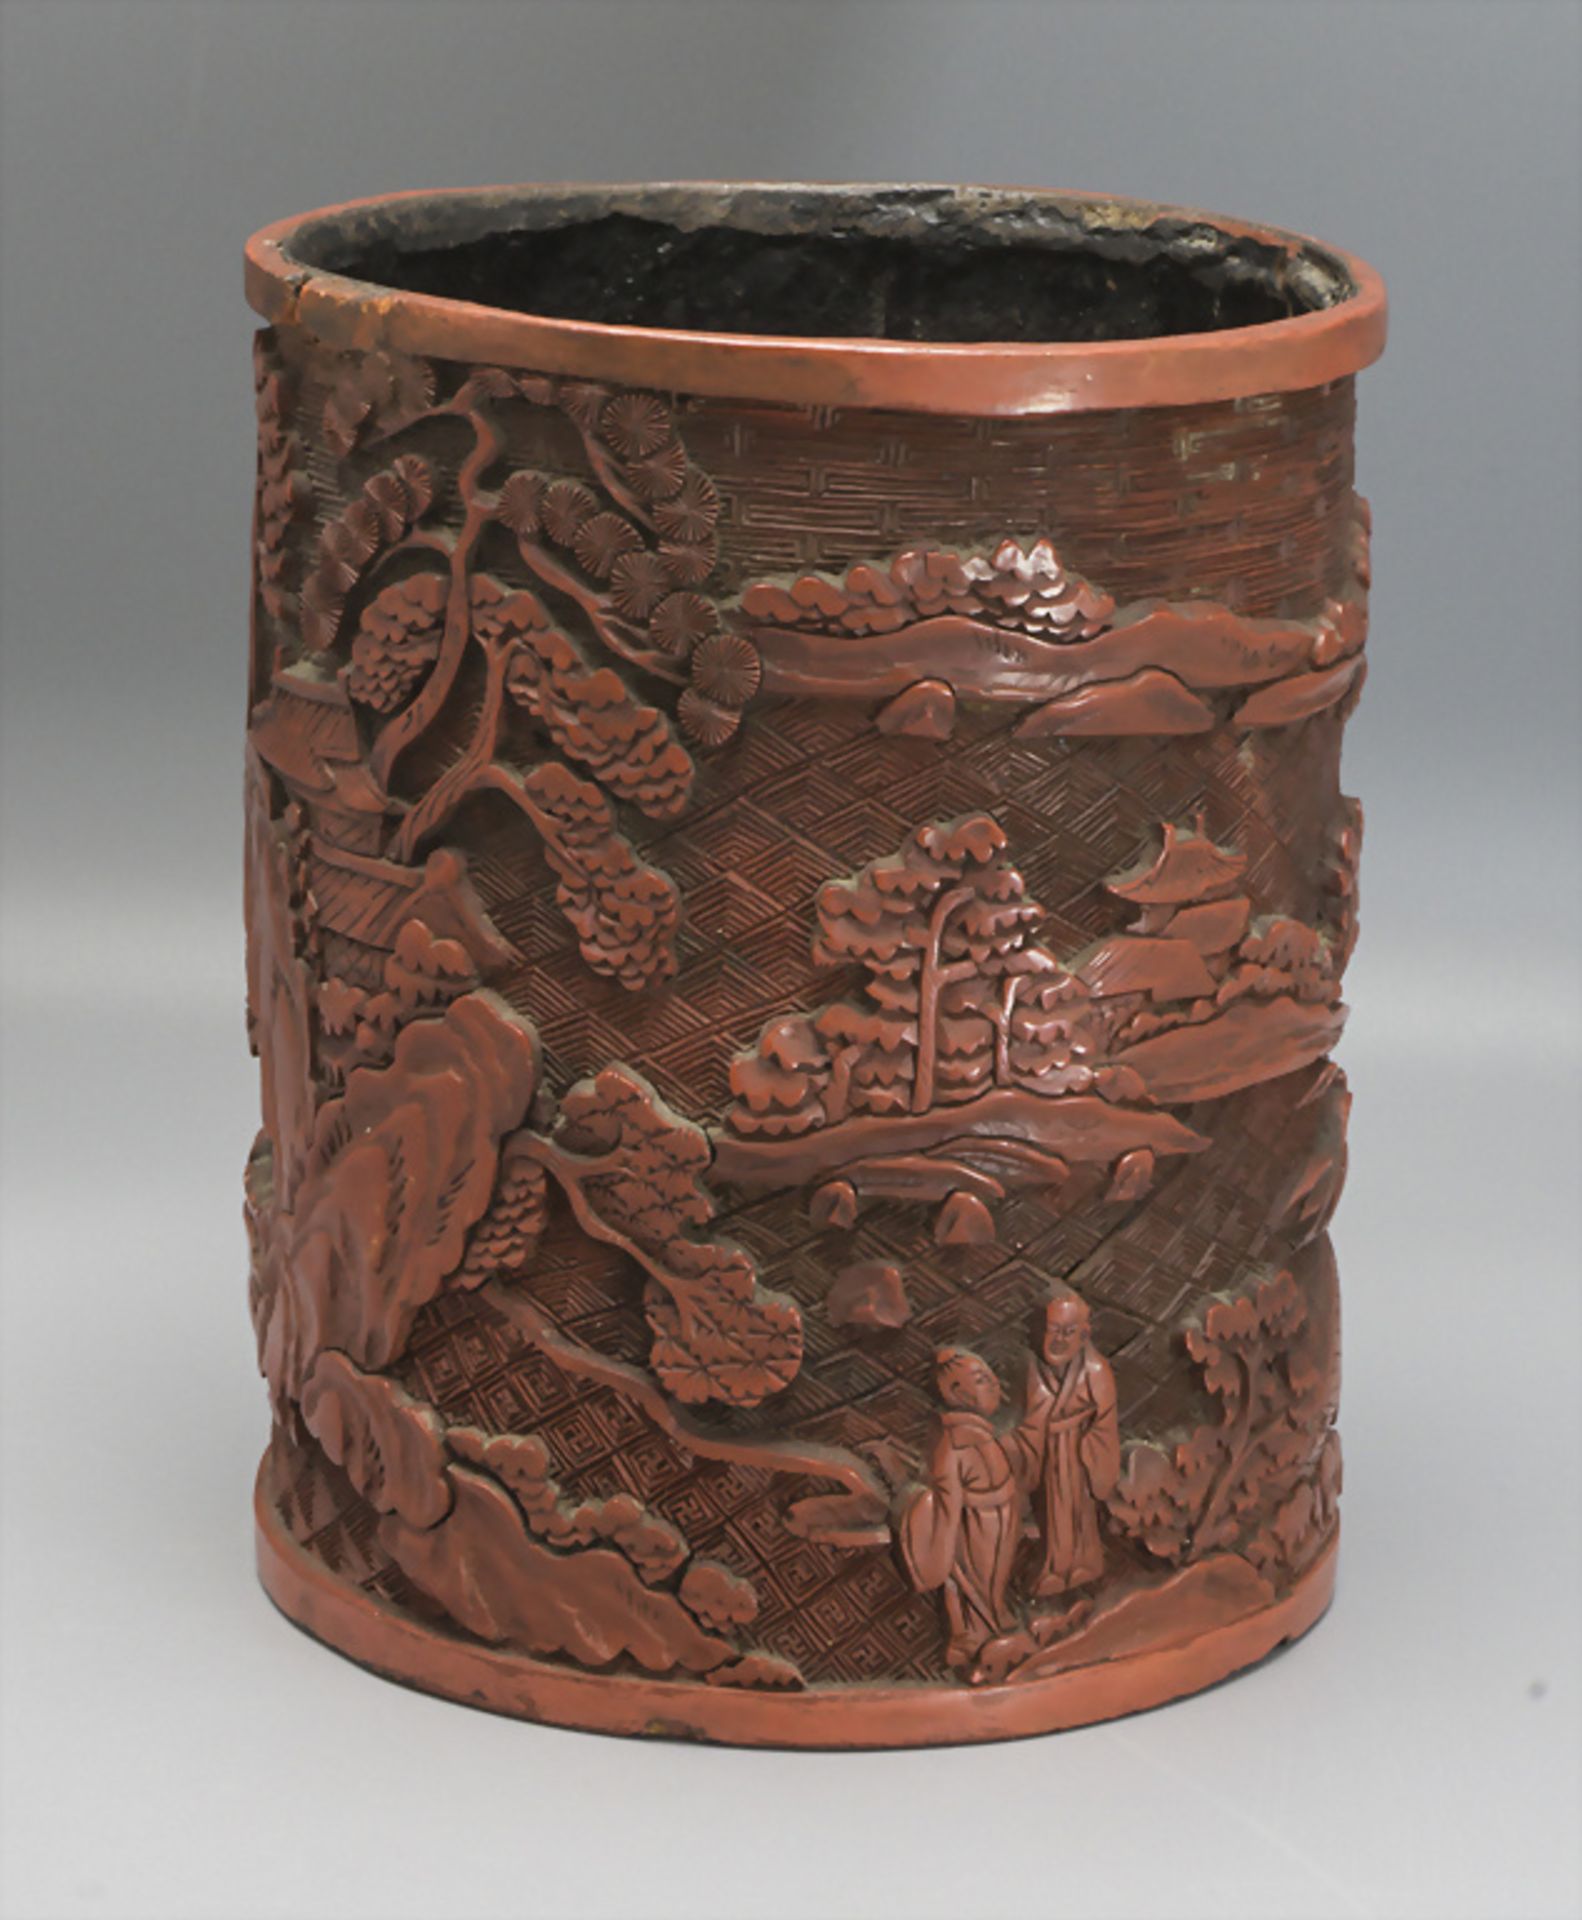 Pinselbecher / A brush cup, China, Qing Dynastie (1644-1911), 17./18. Jh.